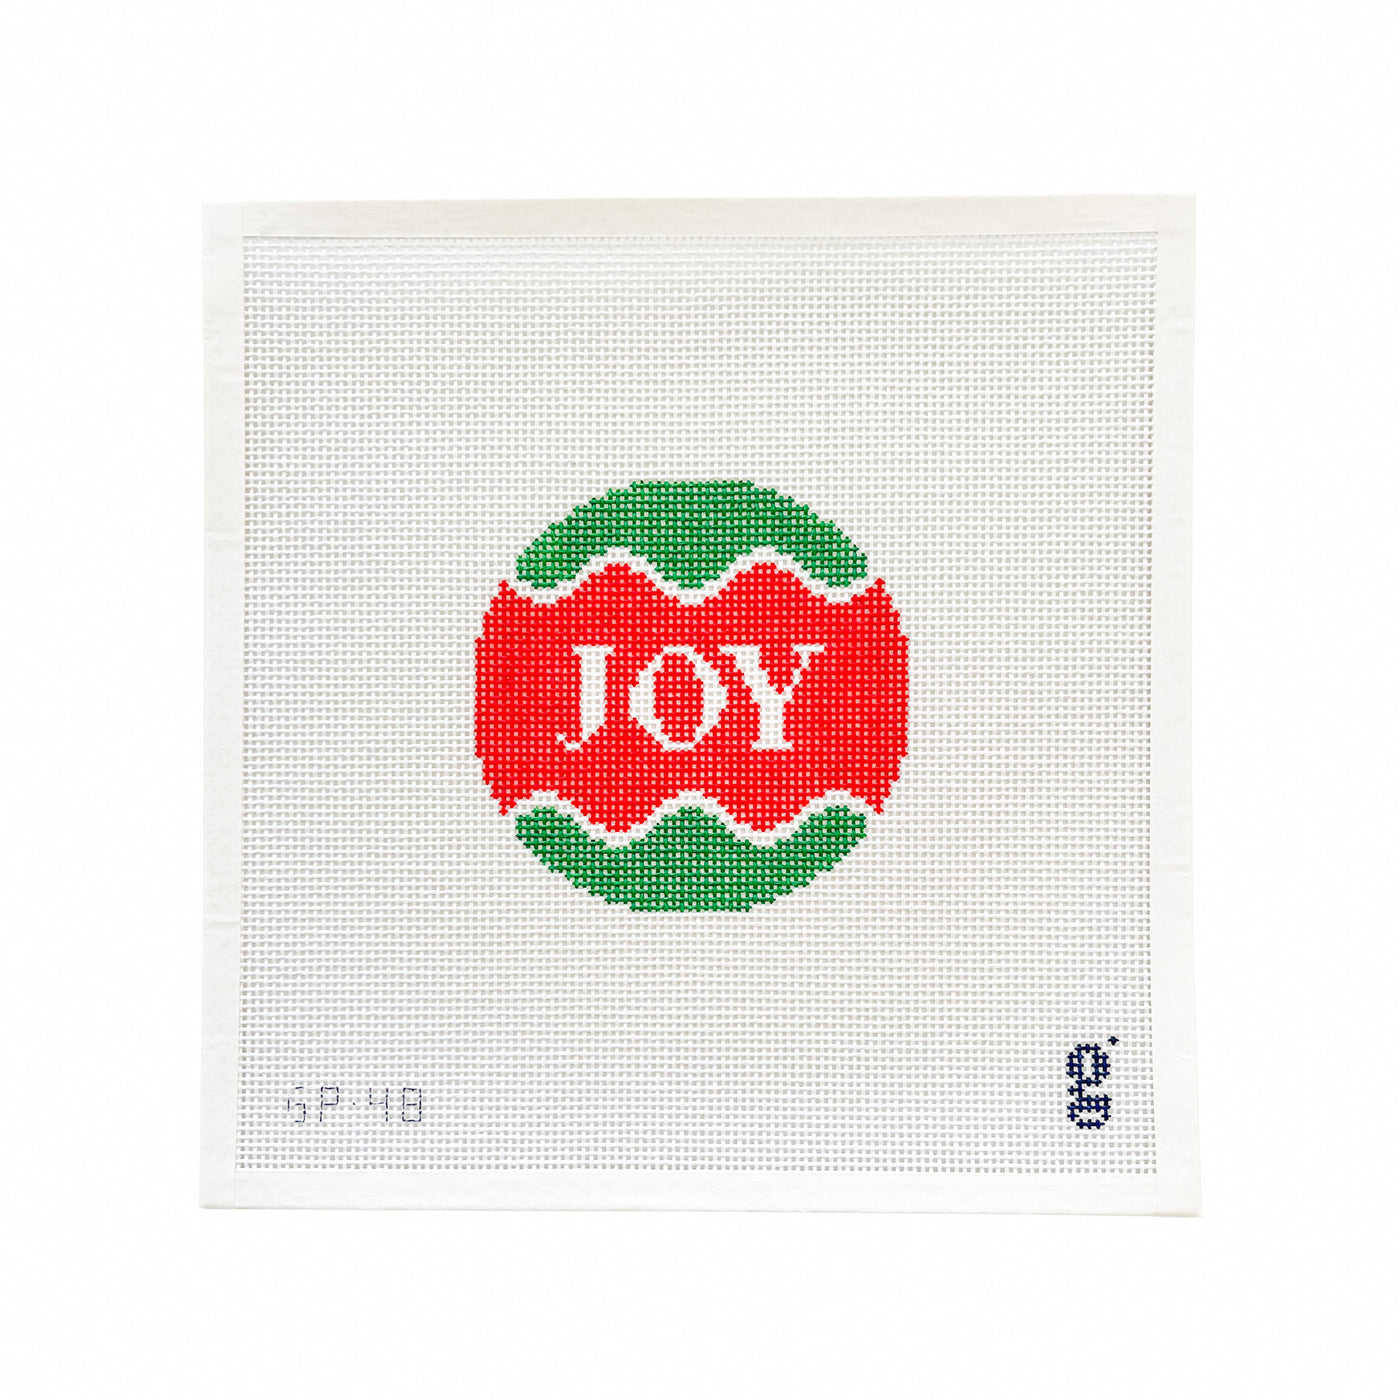 White square needlepoint canvas with red and green circular design at center and the word "JOY" in white lettering